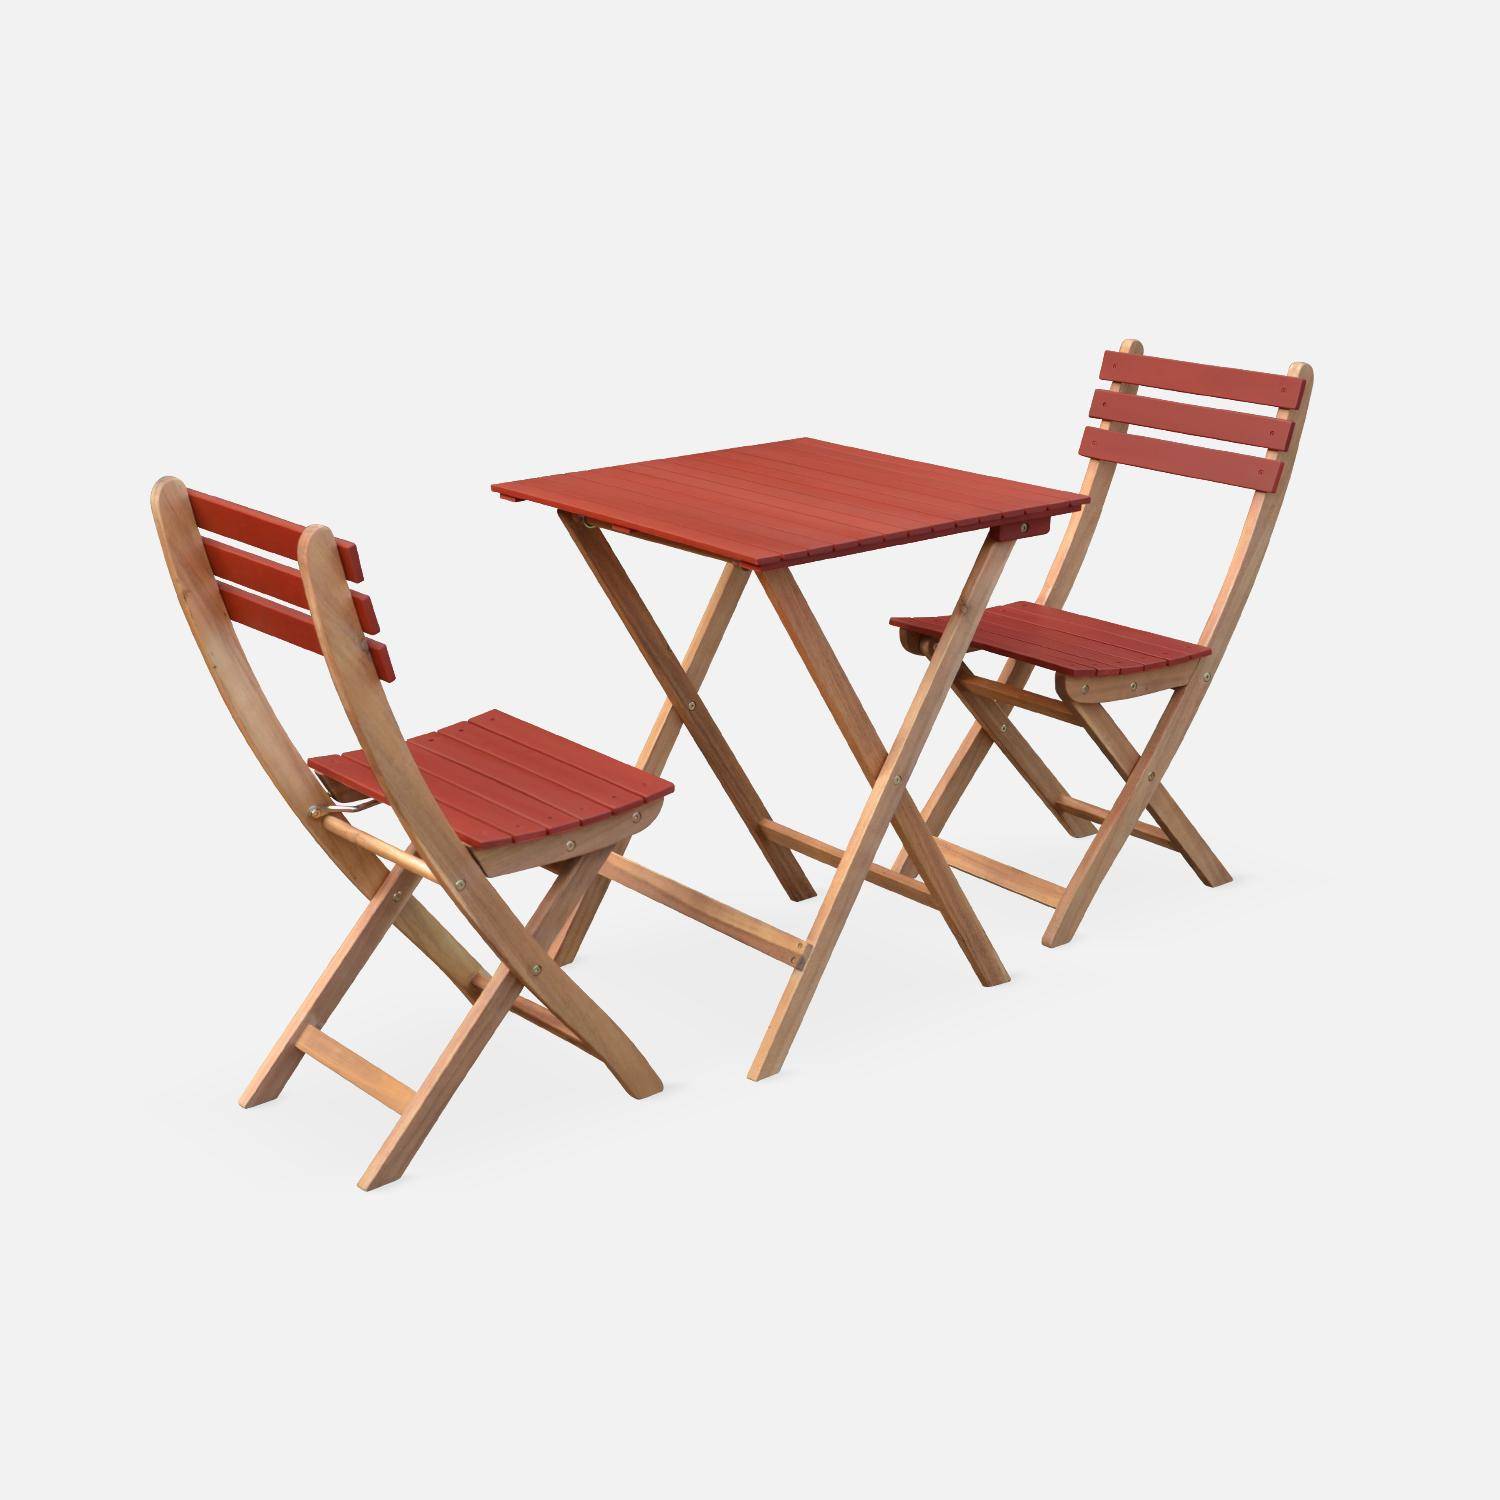 2-seater foldable wooden bistro garden table with chairs, 60x60cm - Barcelona - Terracotta,sweeek,Photo4